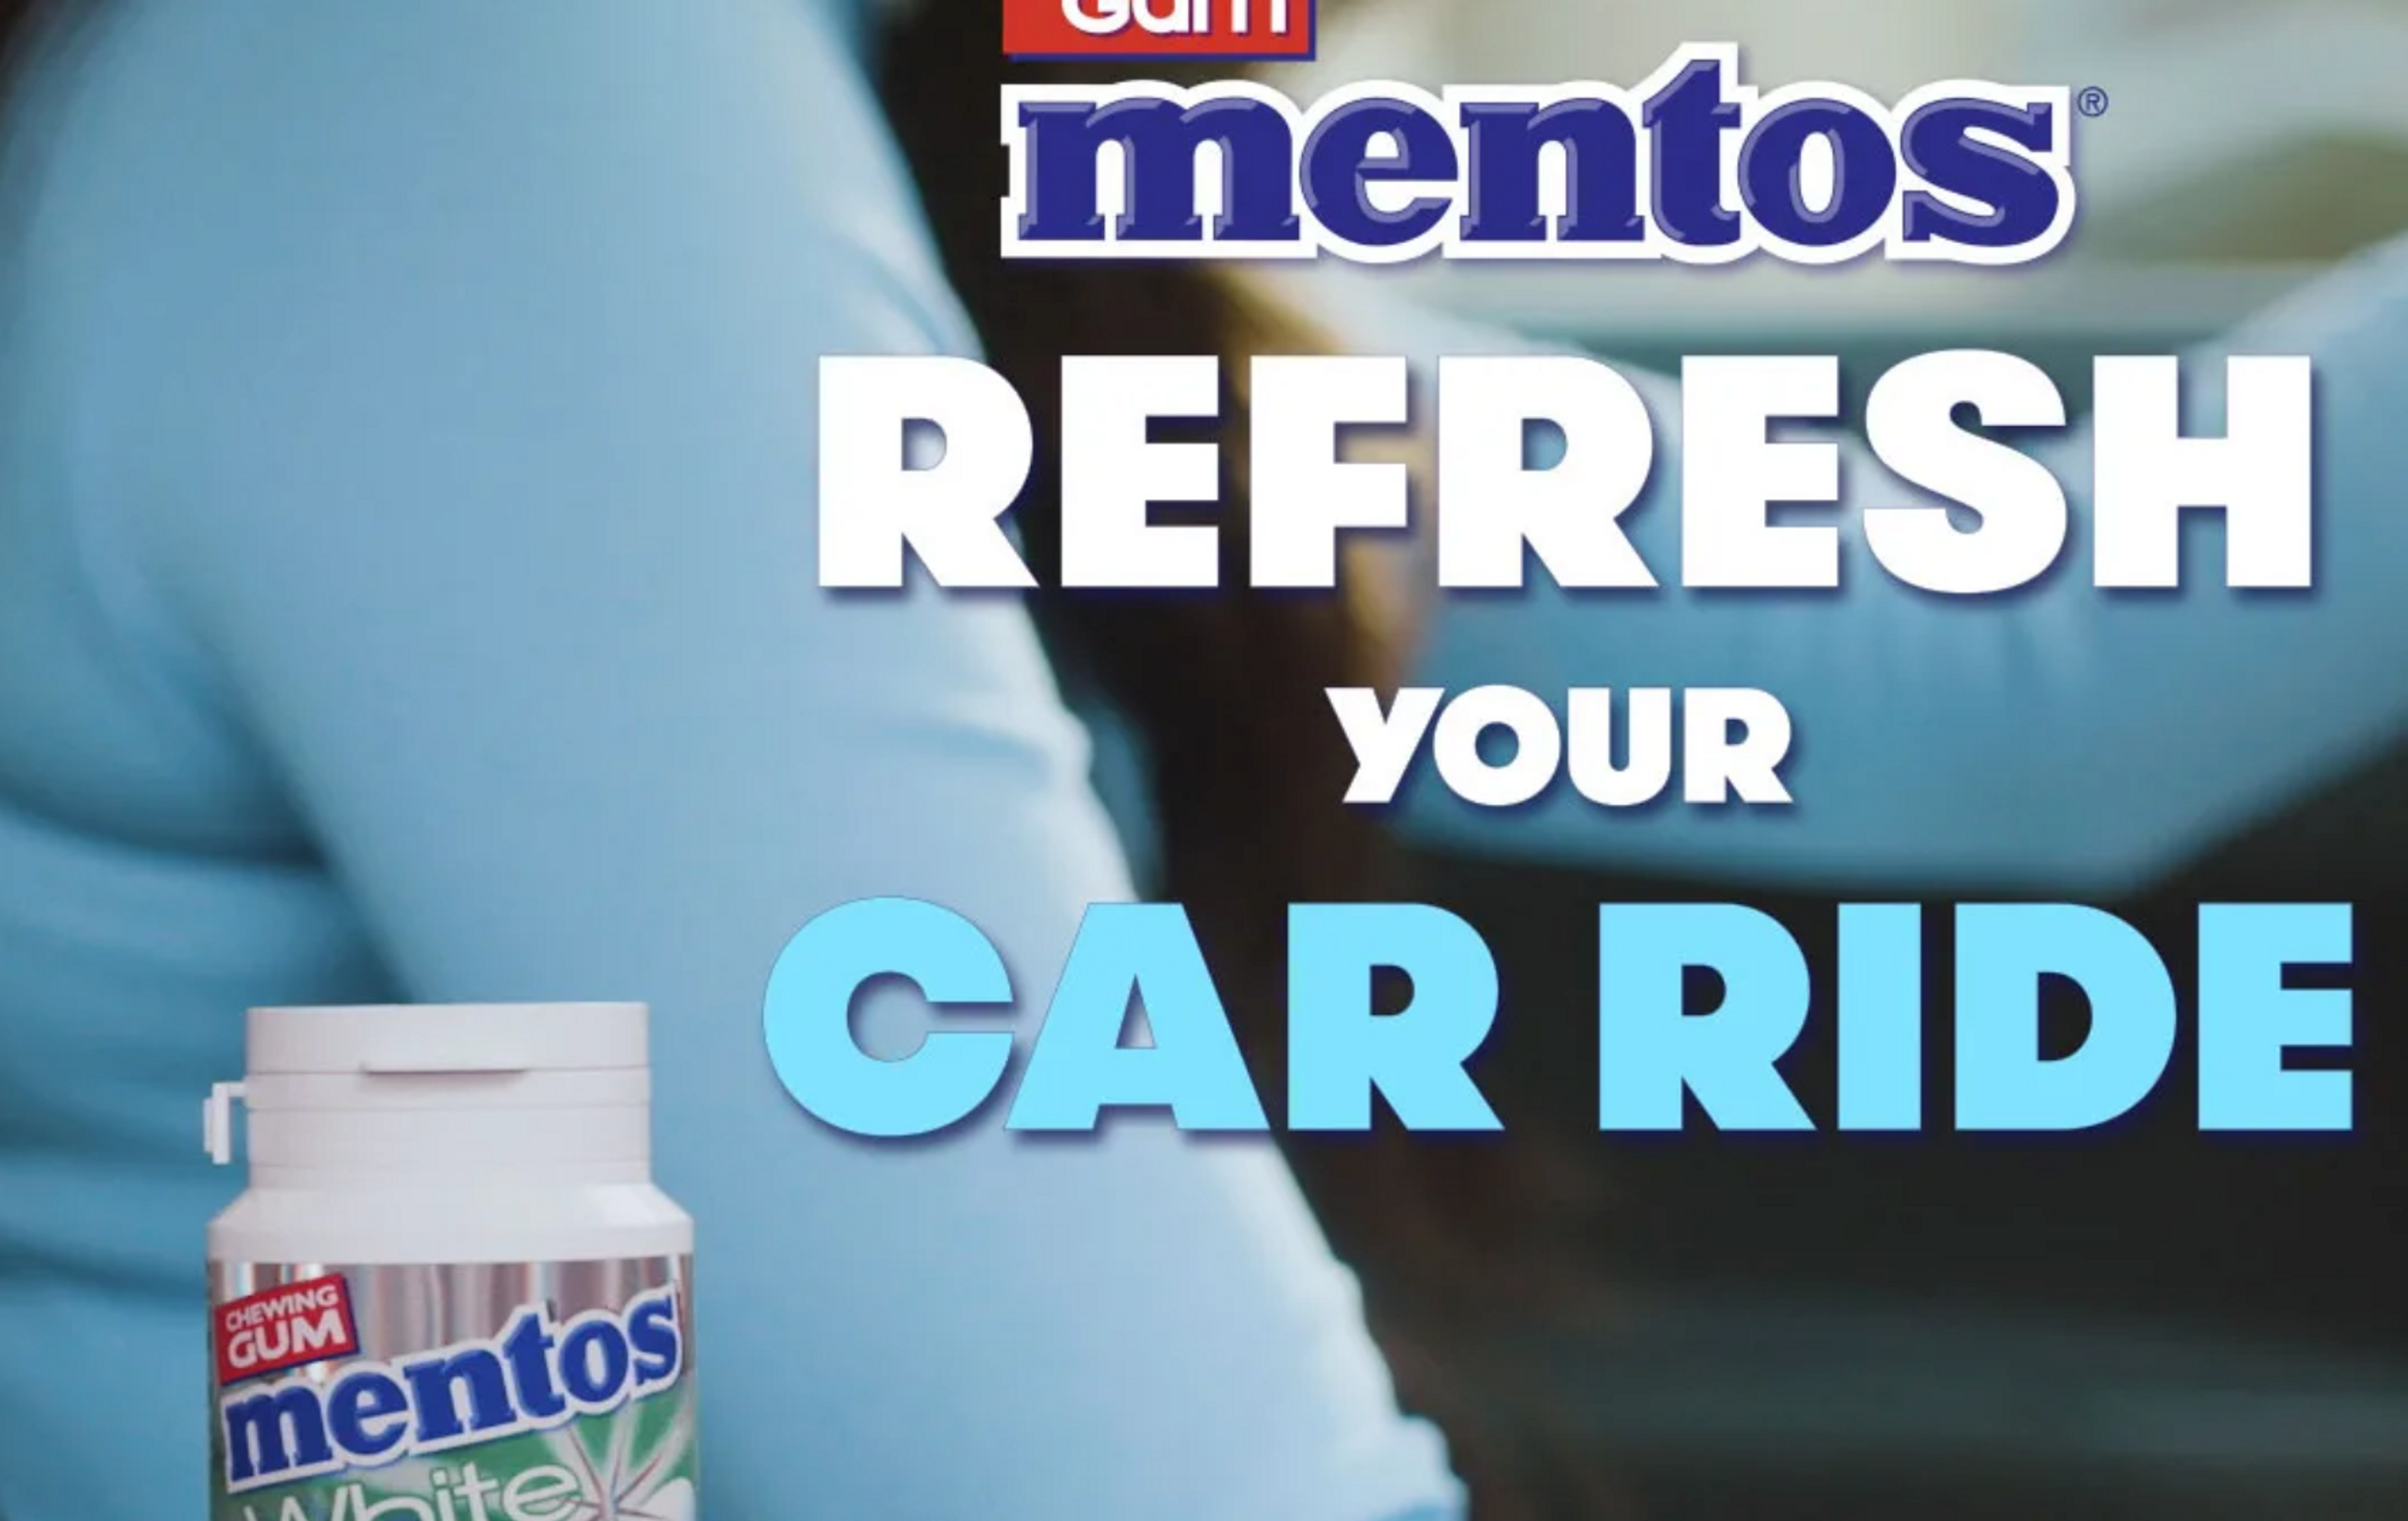 Refresh your car ride!
